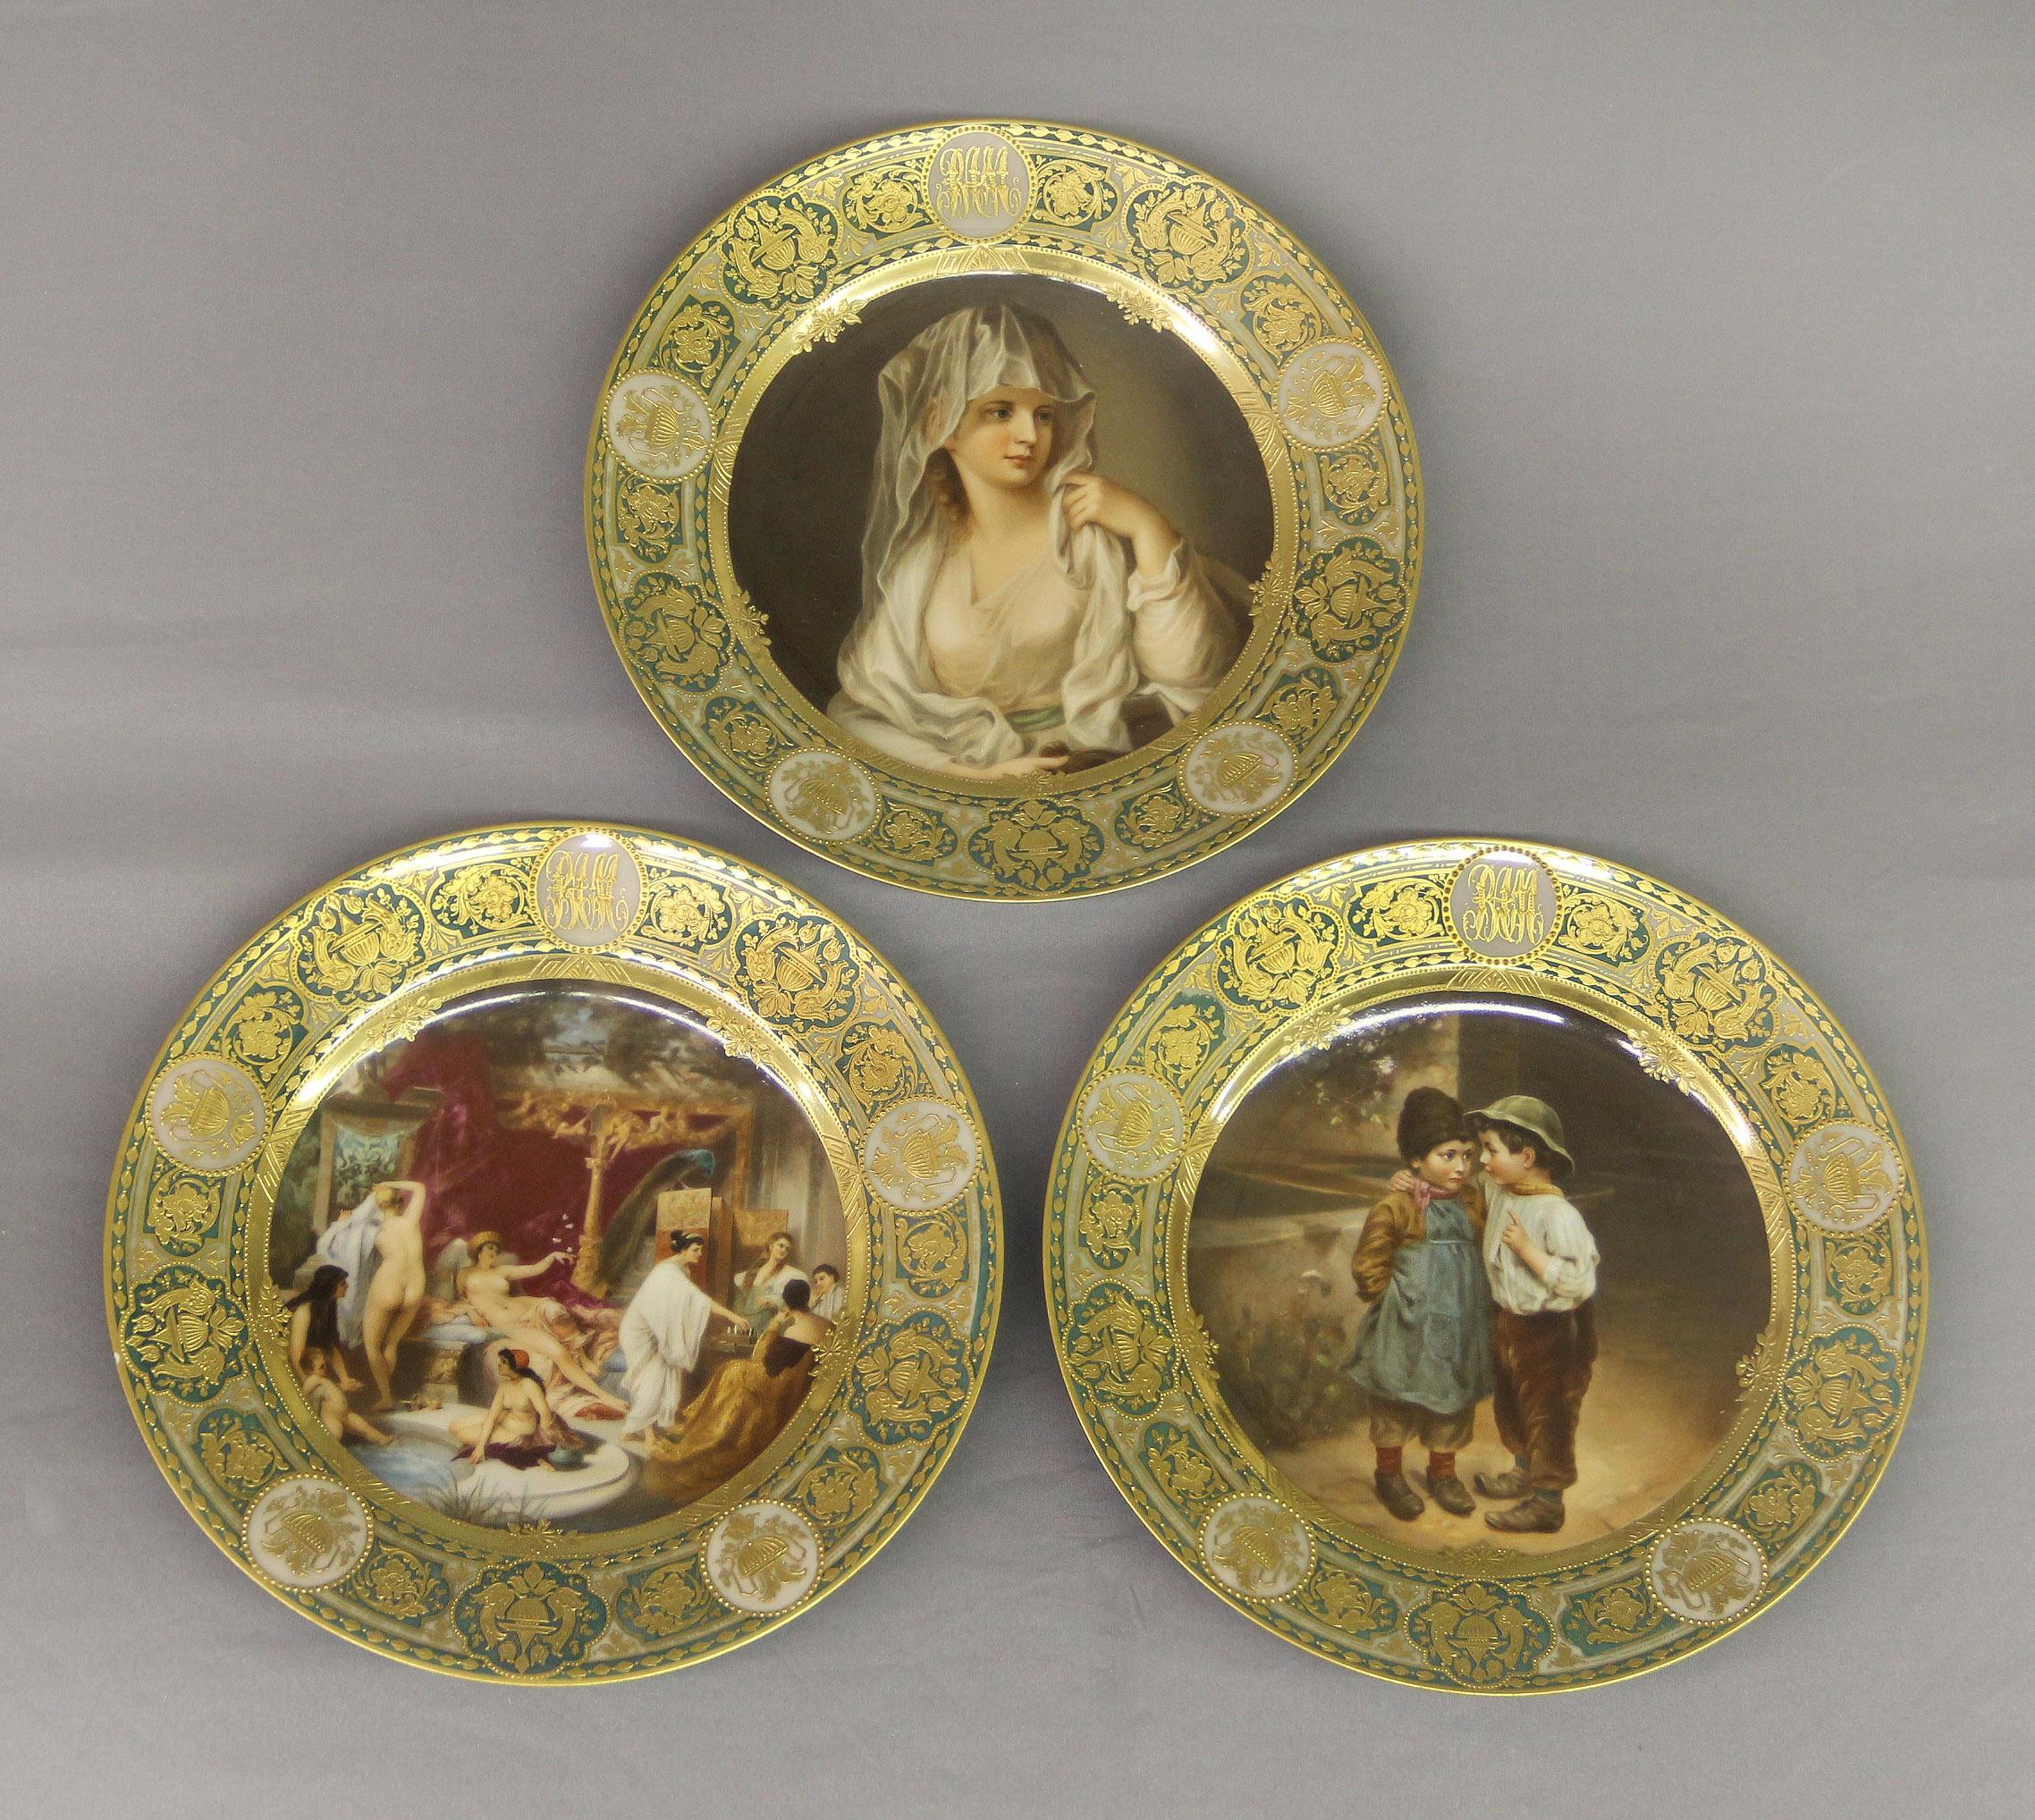 A rare and fantastic set of twelve late 19th century German Dresden Porcelain collector plates

Each plate finely painted with a different historical or mythological portrait and scene, the boarder decorated with raised gold designs and bearing